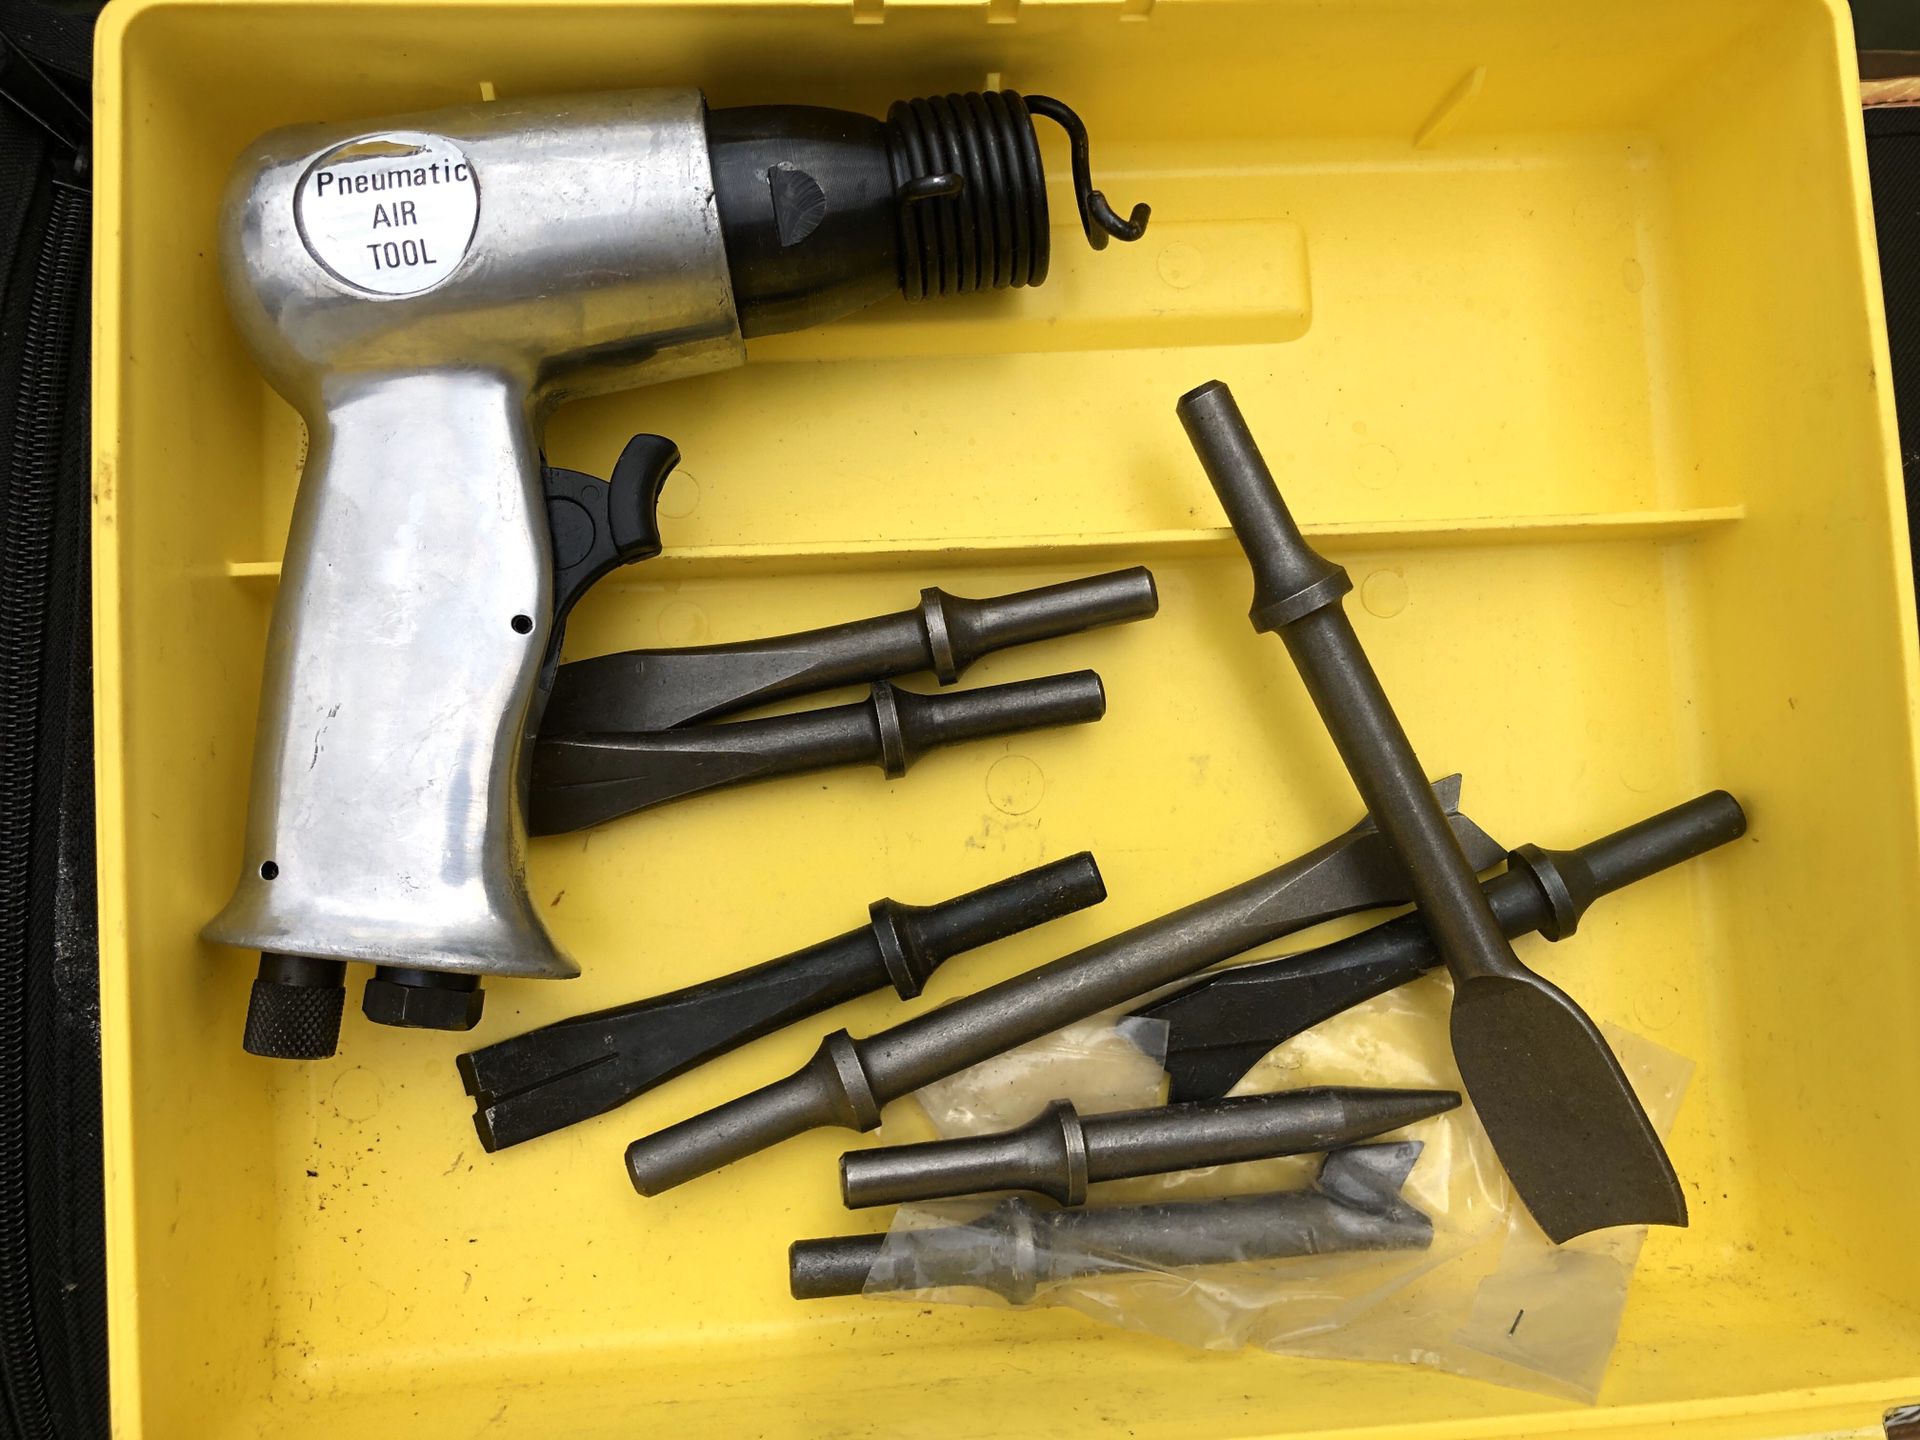 Pneumatic Air Tool Hammer with Case and Accessories